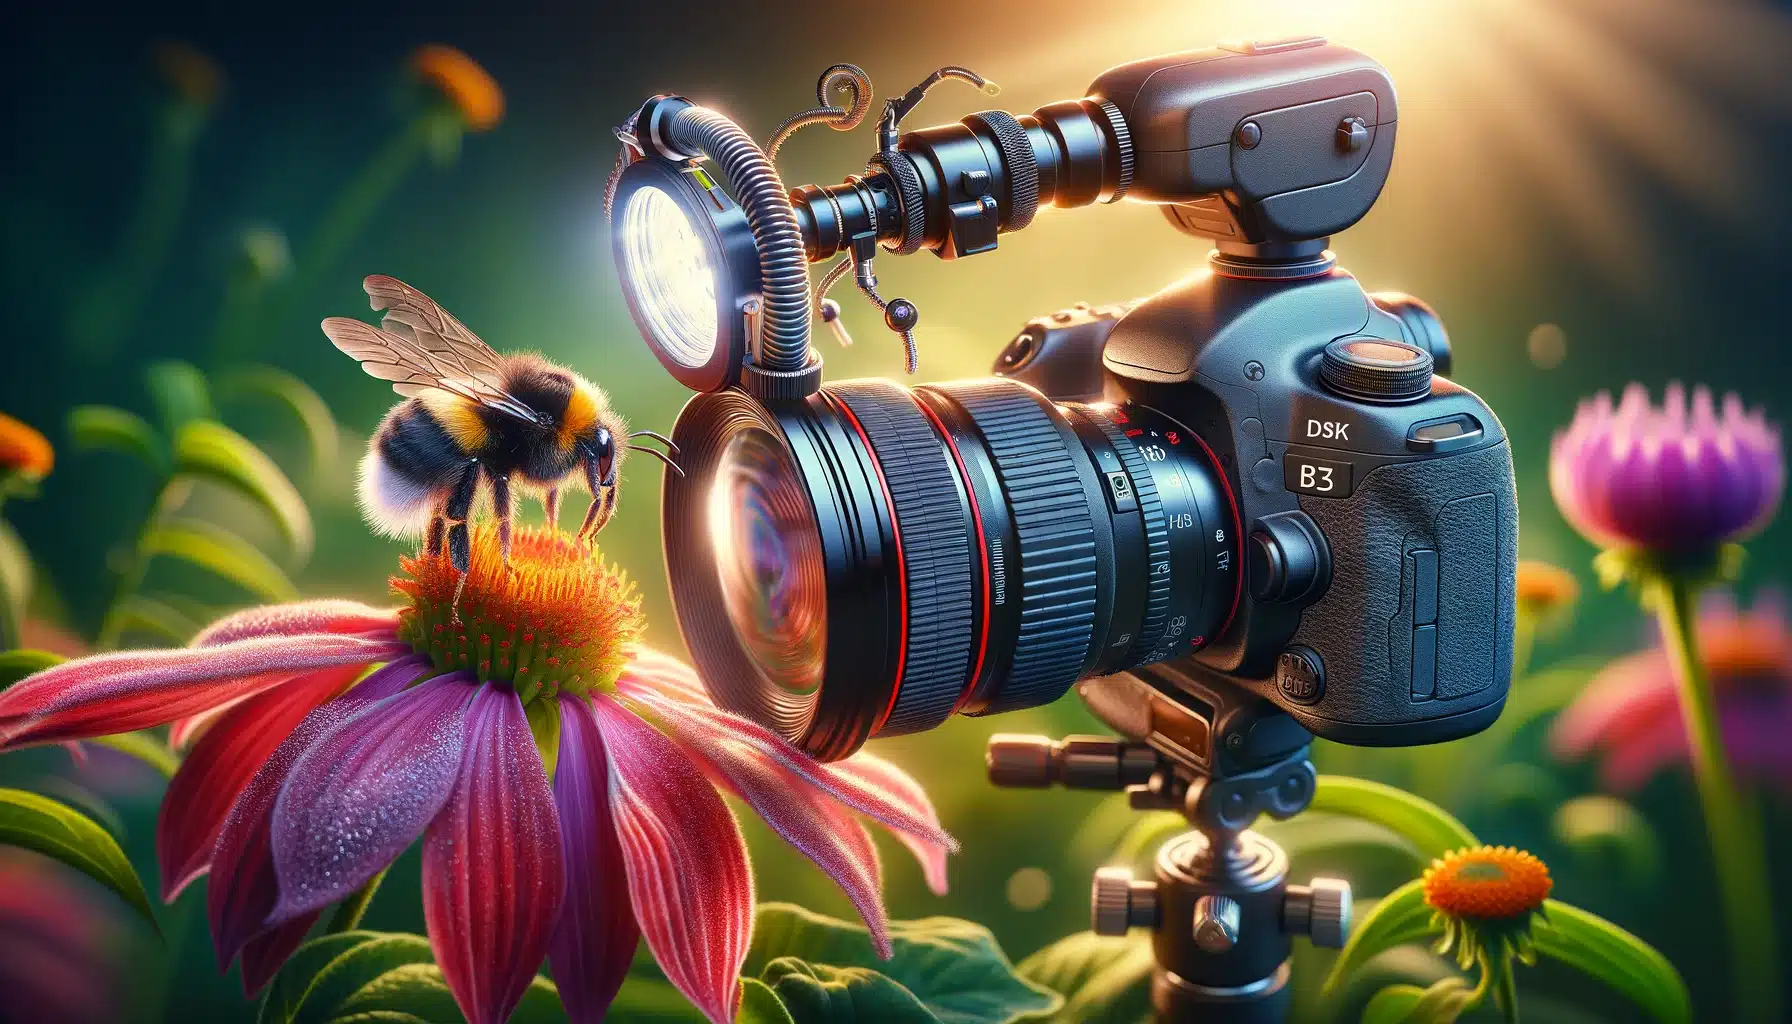 A DSLR camera with macro lens and ring flash captures a bumblebee on a flower, showcasing the essence of macro photography.